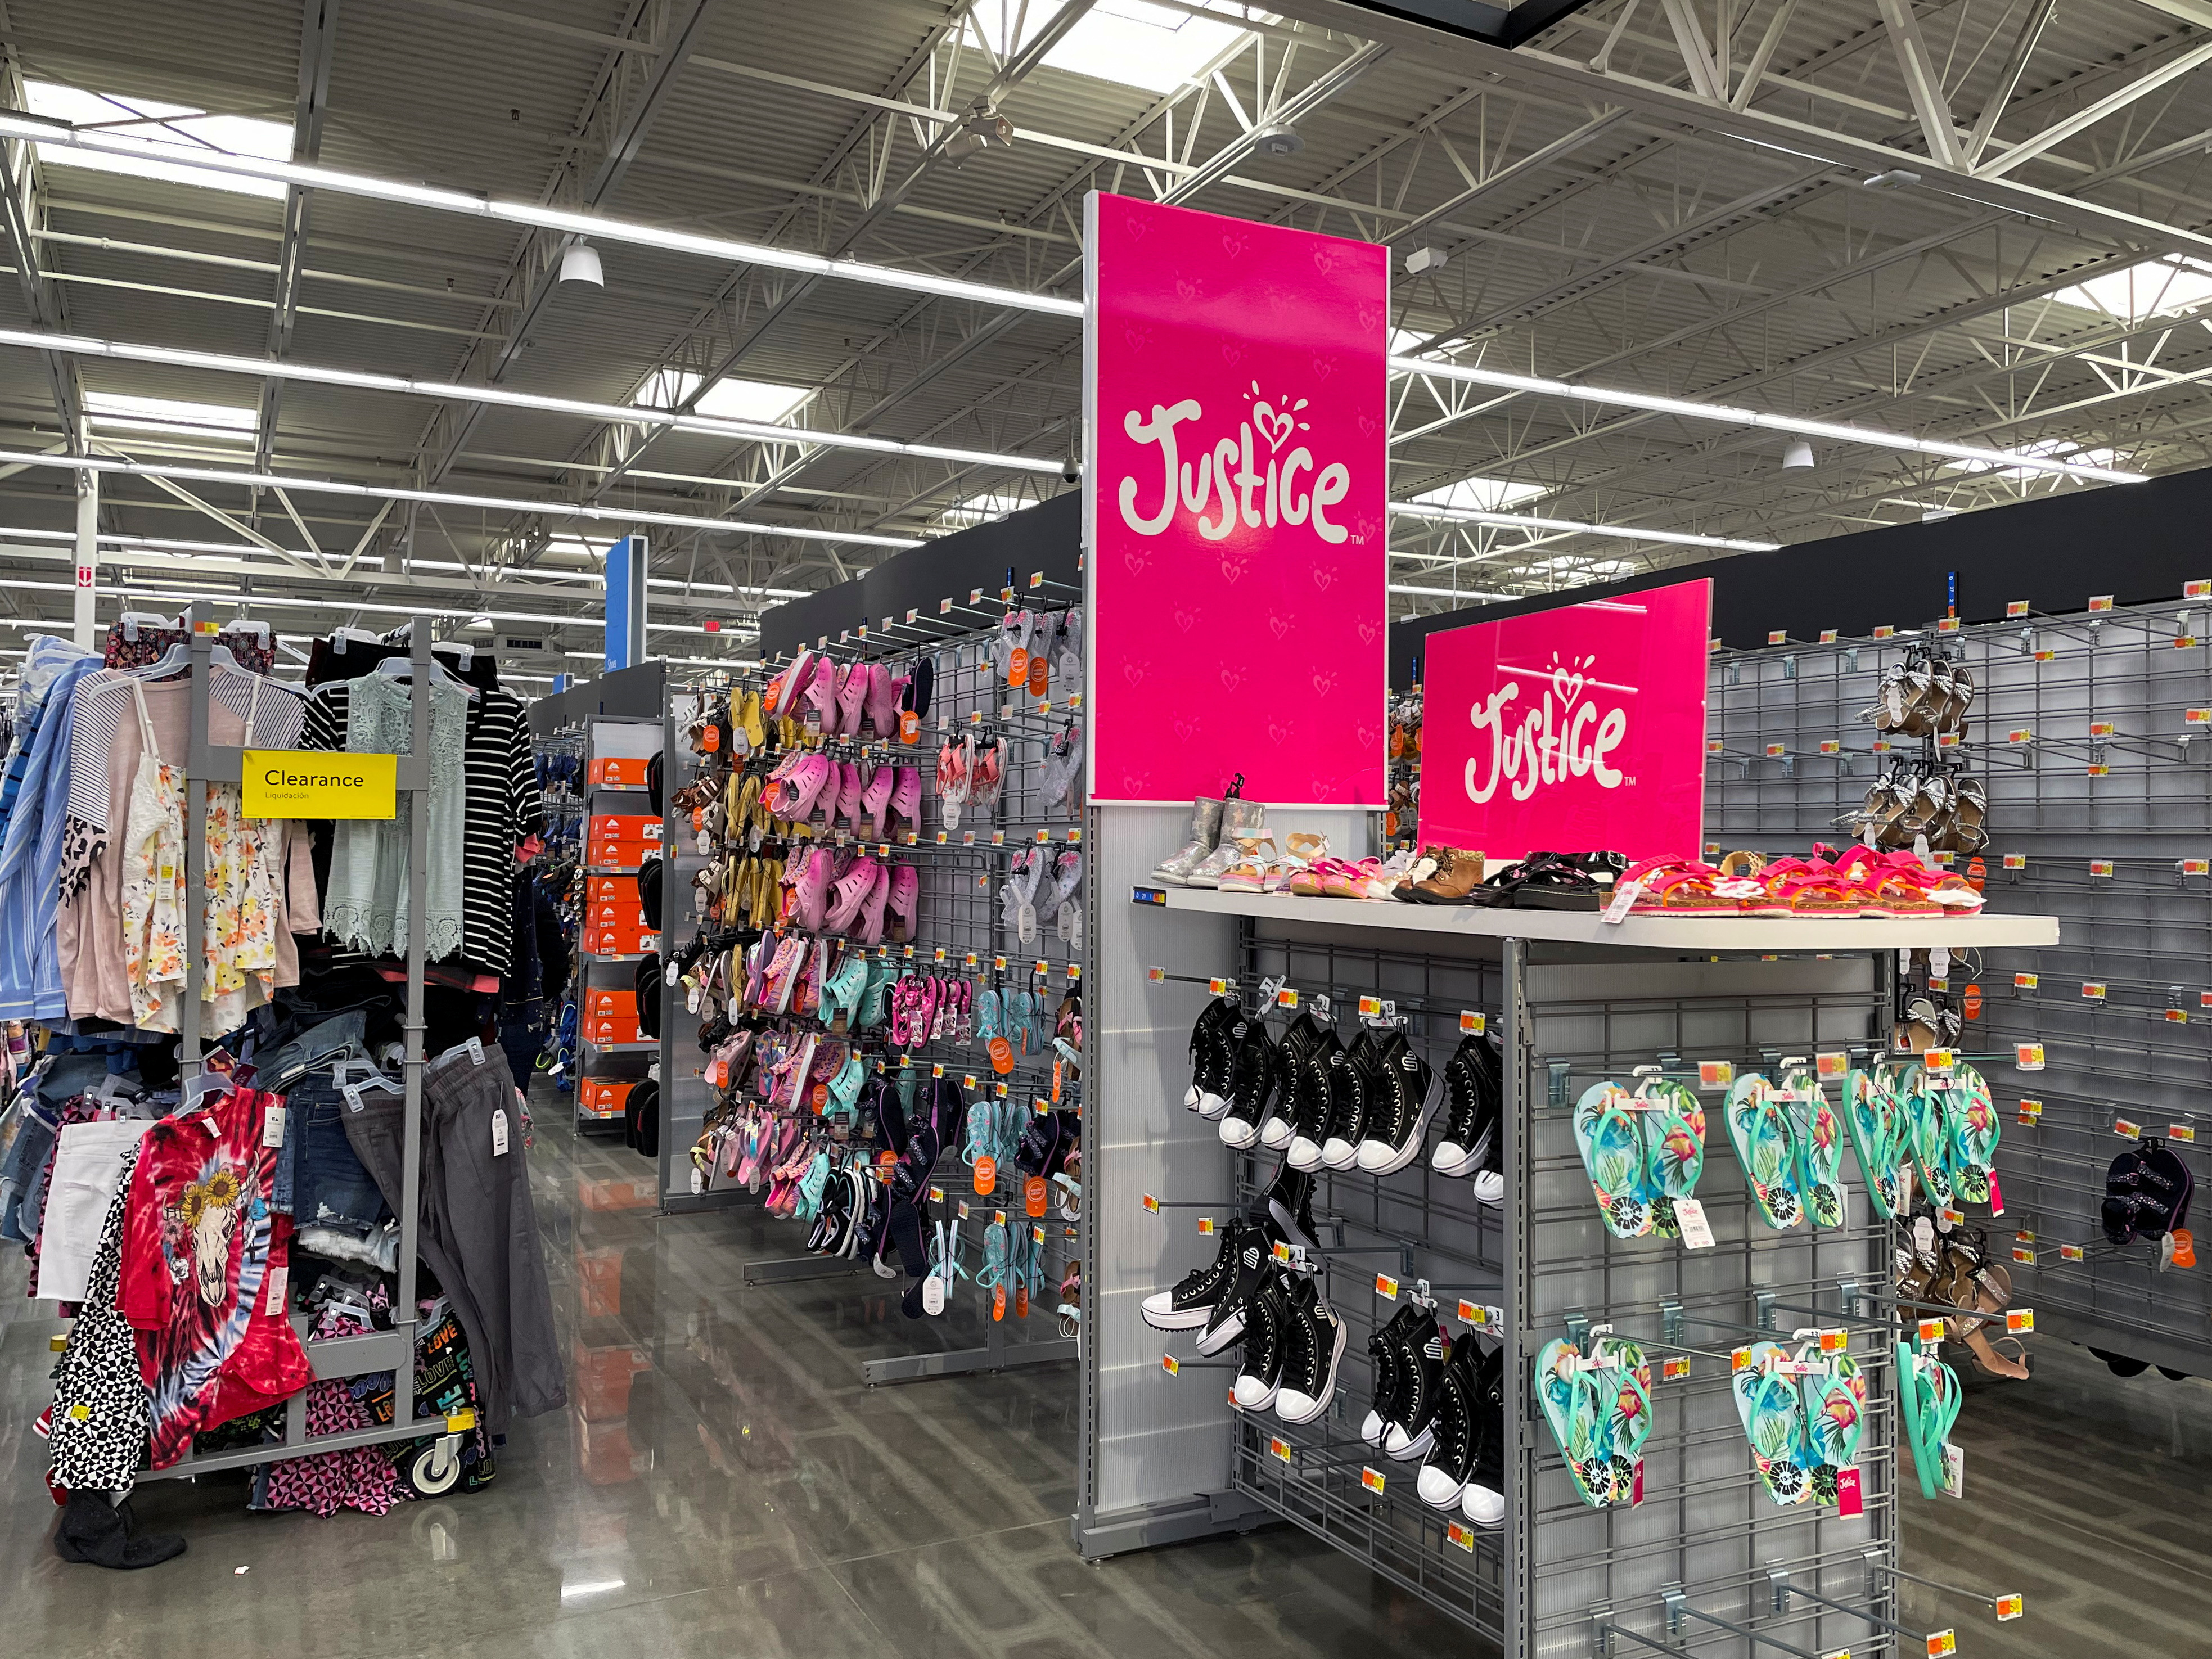 Walmart Aims To Retain Affluent Shoppers With Newly Revamped Stores